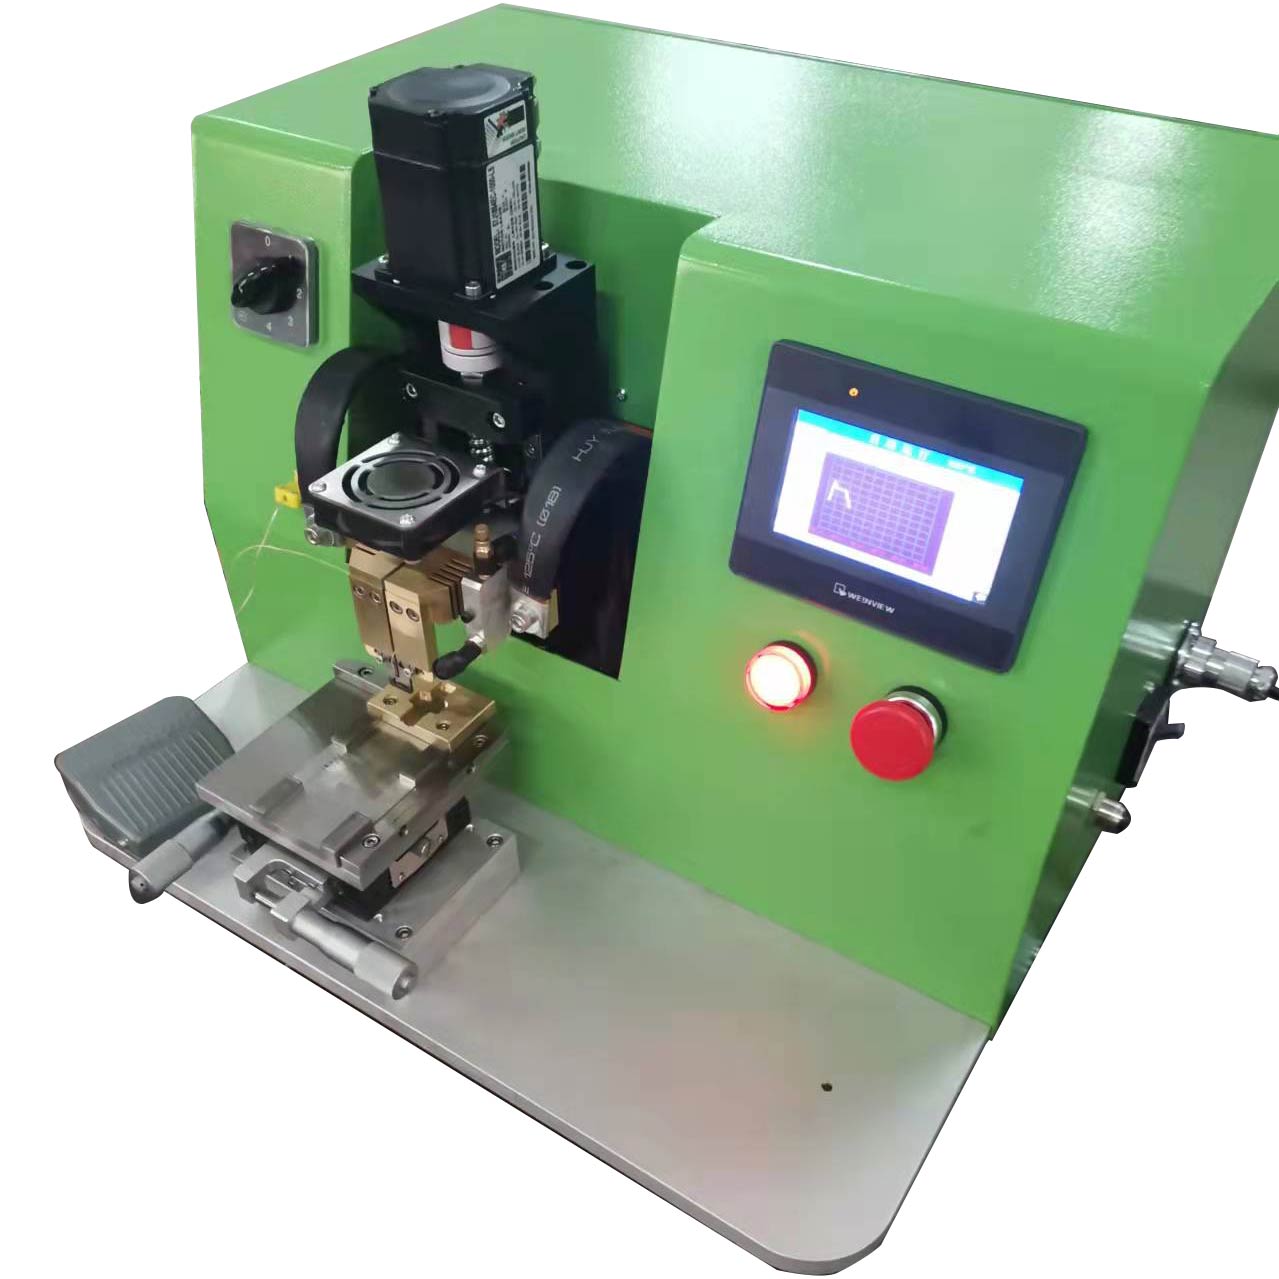 Search  - micro-laser-welding-machine - Laser cutting machine,Laser welding macine,Laser cutter,laser marking machine,laser printing machine Manufacturers & Suppliers - Taiyi Laser Technology Company Limited